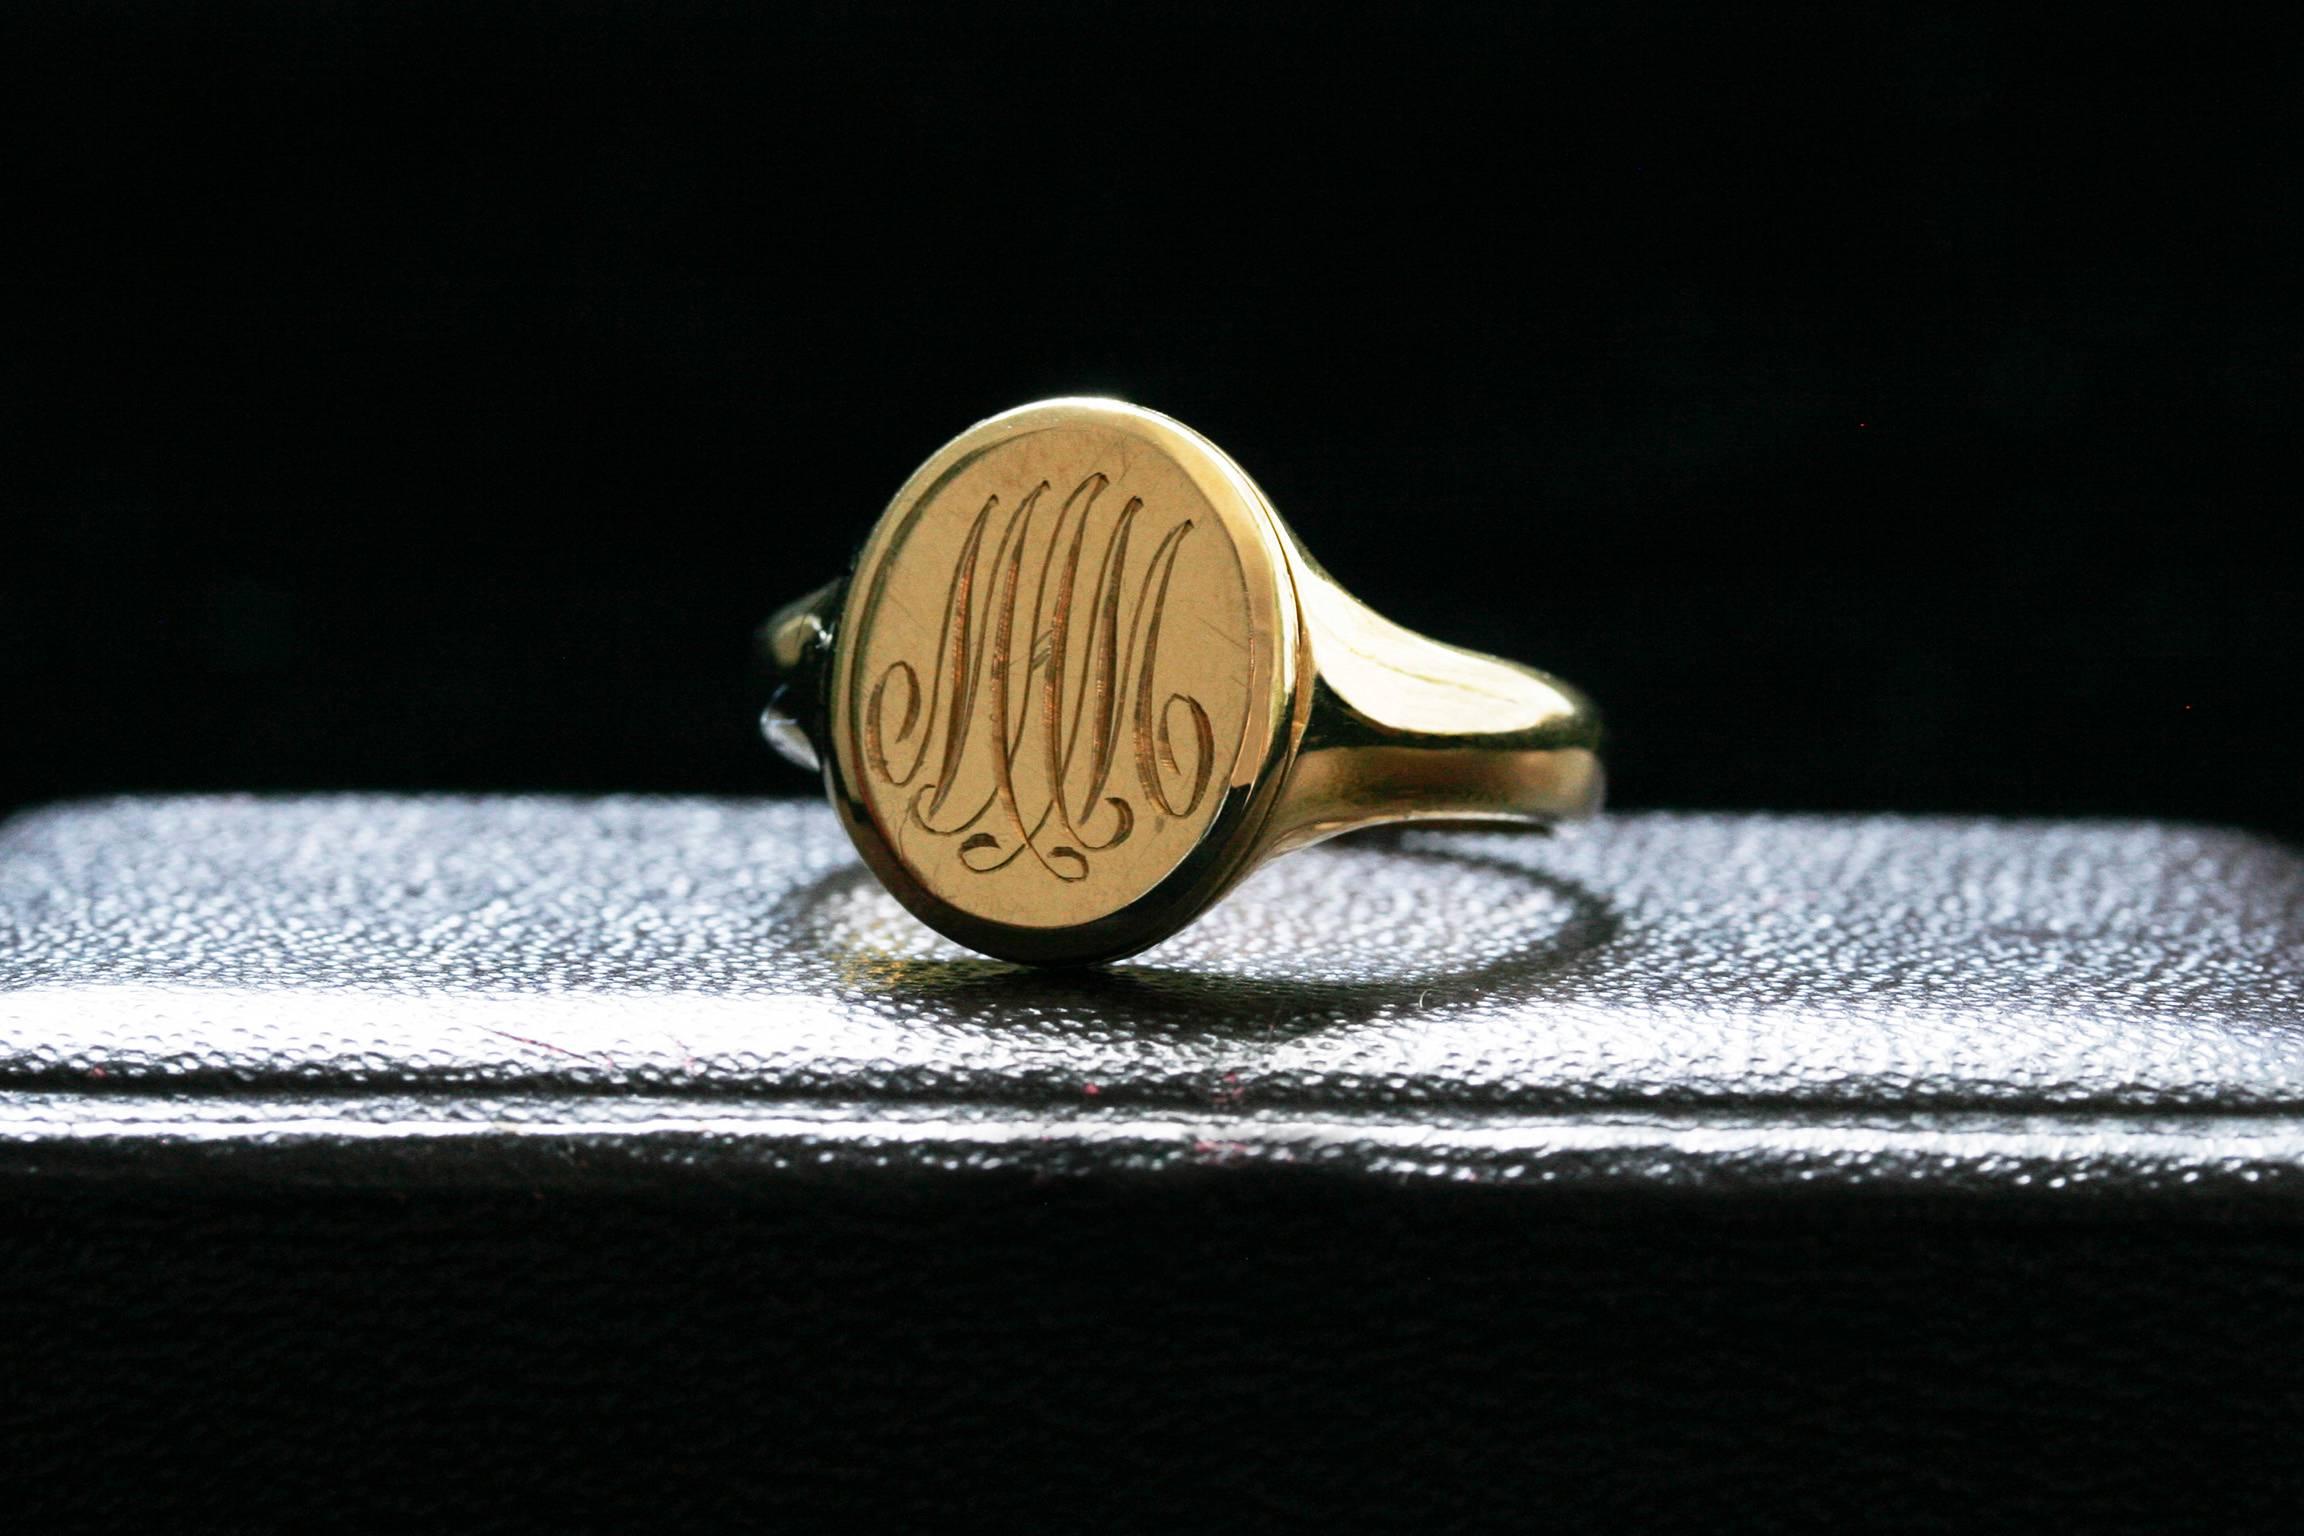 A late Victorian secret locket ring. This 18k gold signet ring was engraved with the initials ‘MAM’. London hallmarked 1897, contains a hidden hinged locket compartment to its head, which reveals a vitreous enameled photo momento. English in